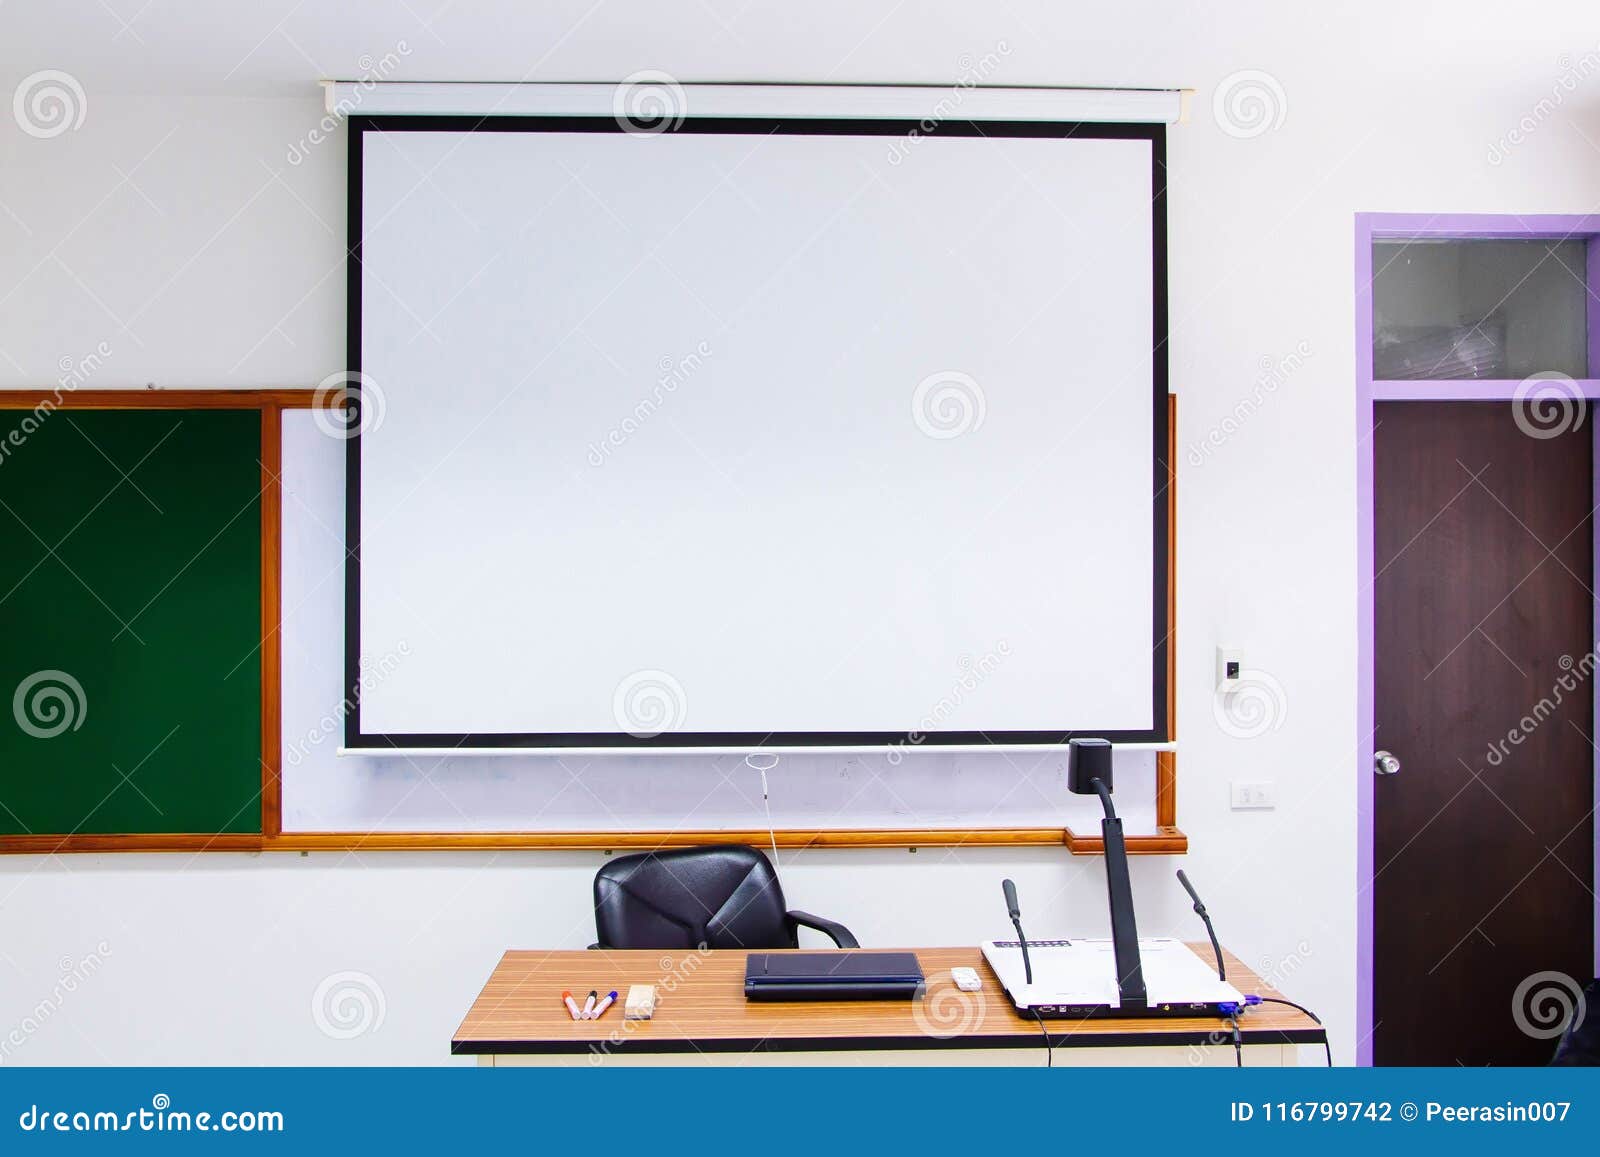 White Classrooms Are Currently Available With Student Desks And